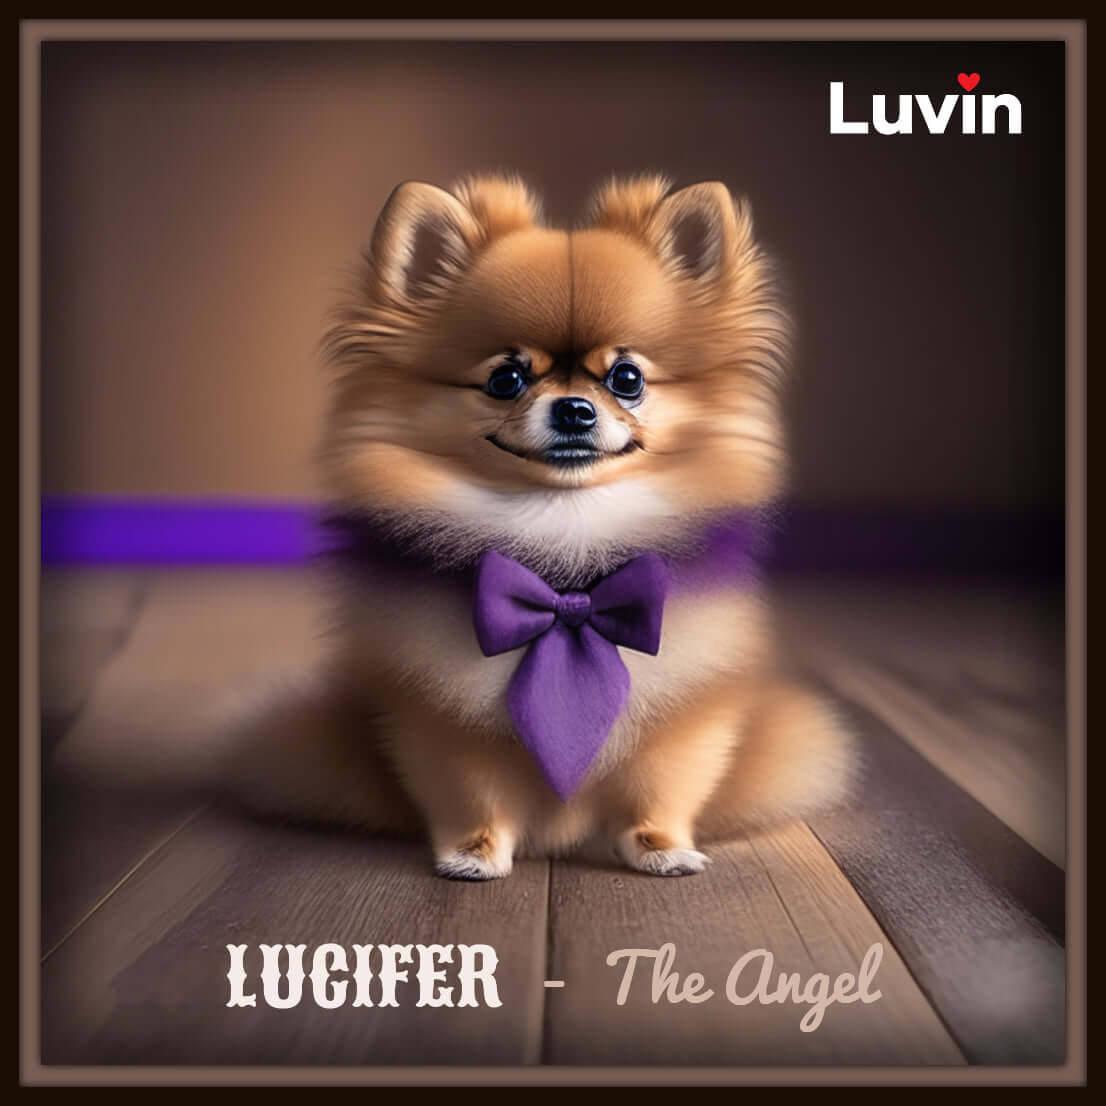 Digital portrait of a cute Pom sitting upright on a wooden floor with a nice purple bow